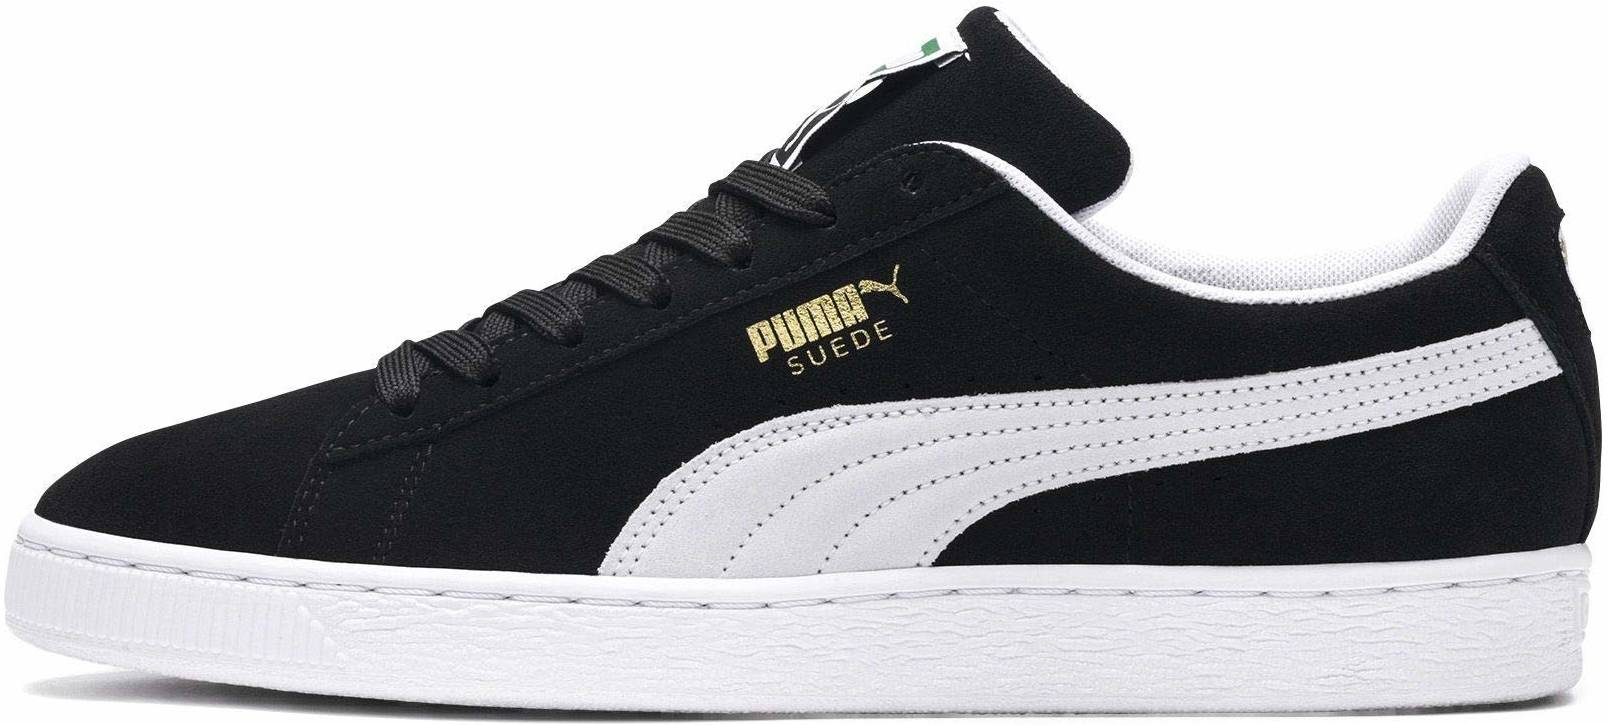 Downtown subtraction Visiting grandparents Puma Suede Classic+ sneakers in 10+ colors (only $30) | RunRepeat